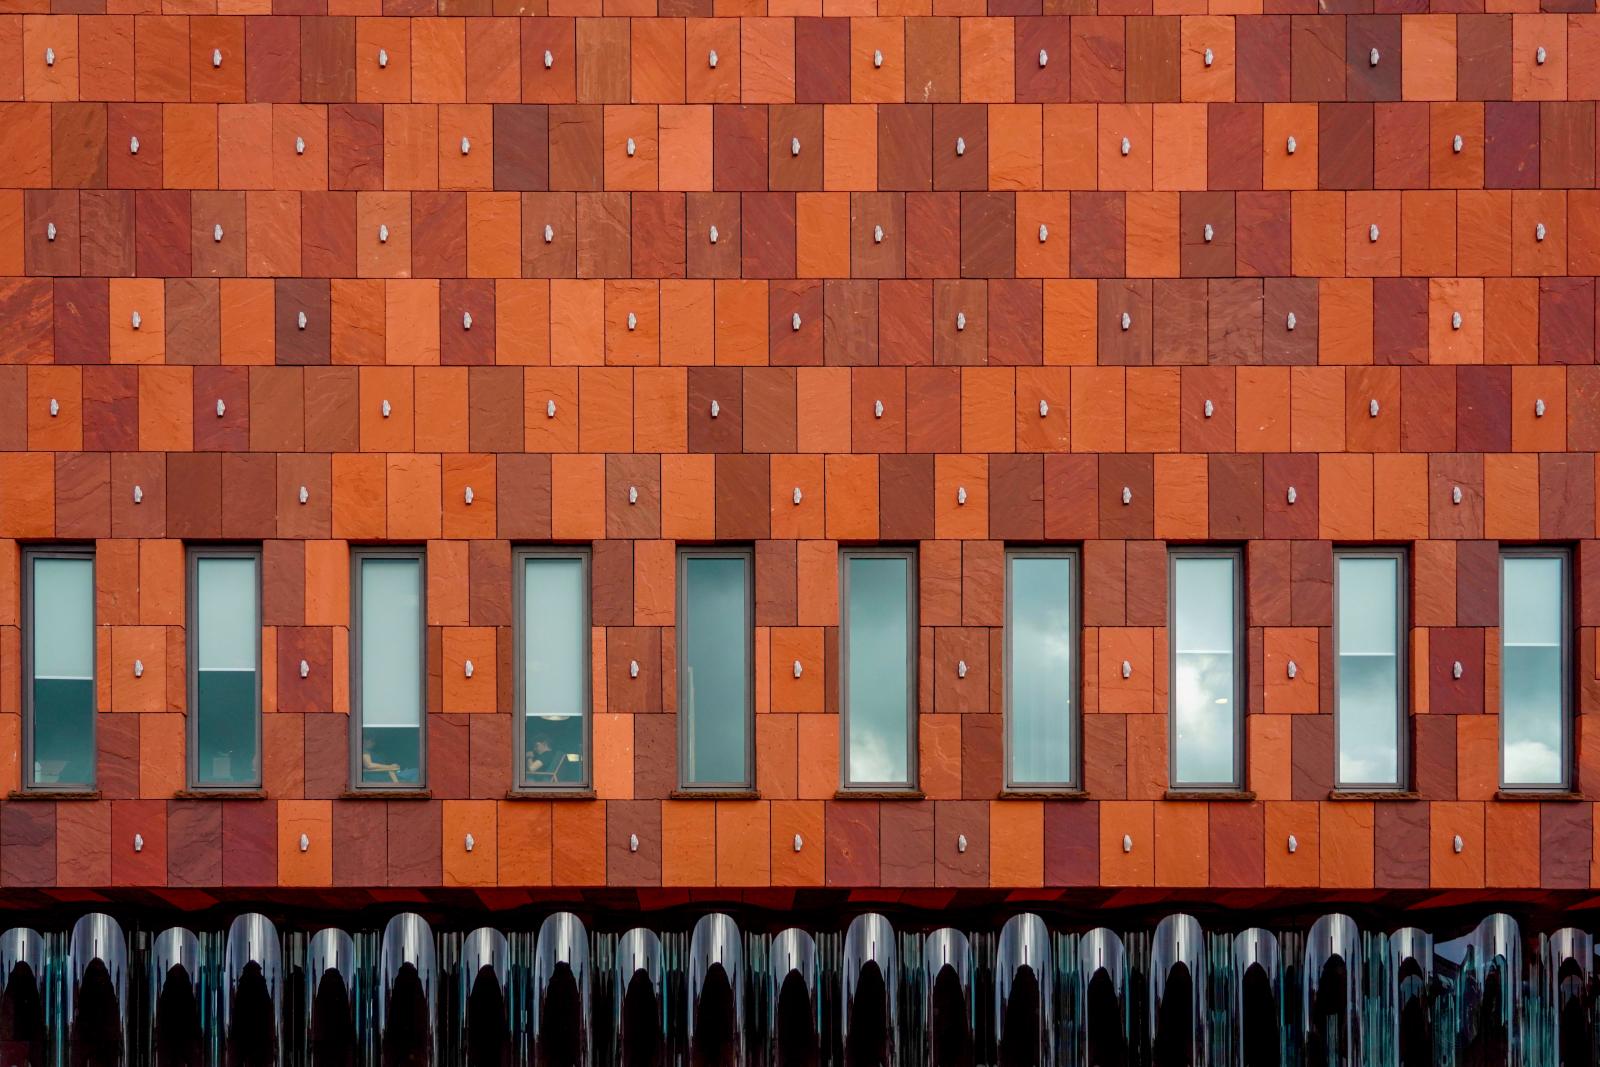 A facade with an undulating glass curtain | Buy this image